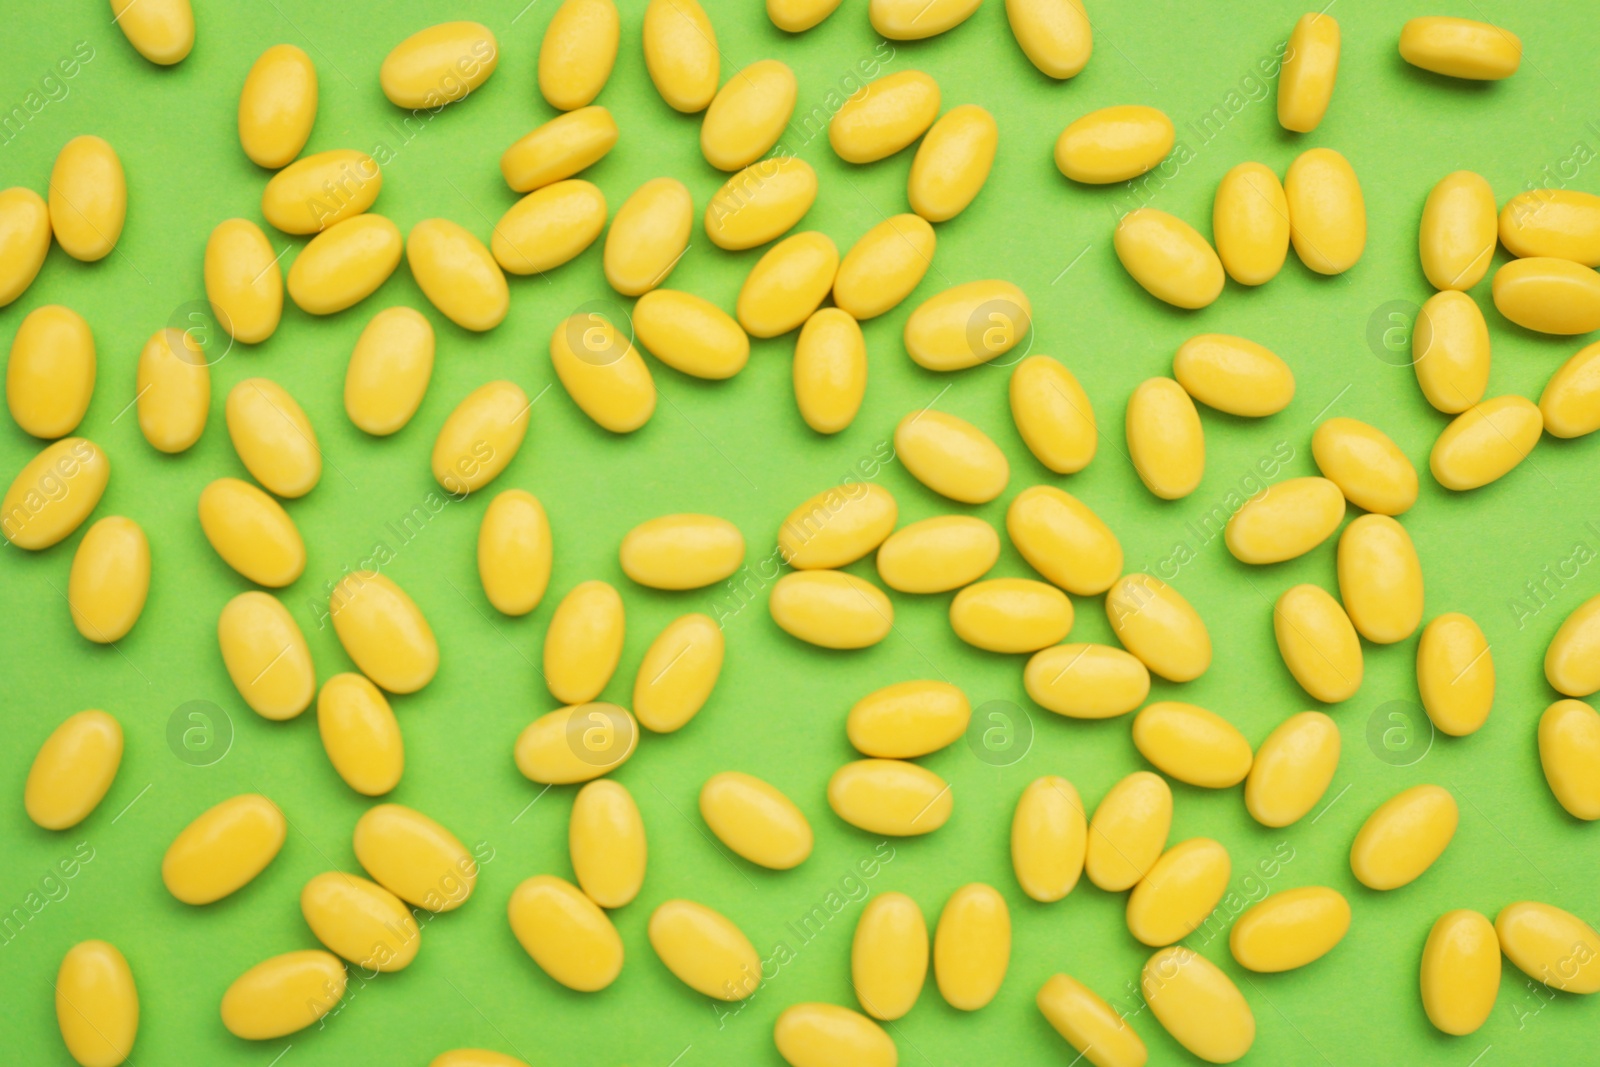 Photo of Many yellow dragee candies on green background, flat lay